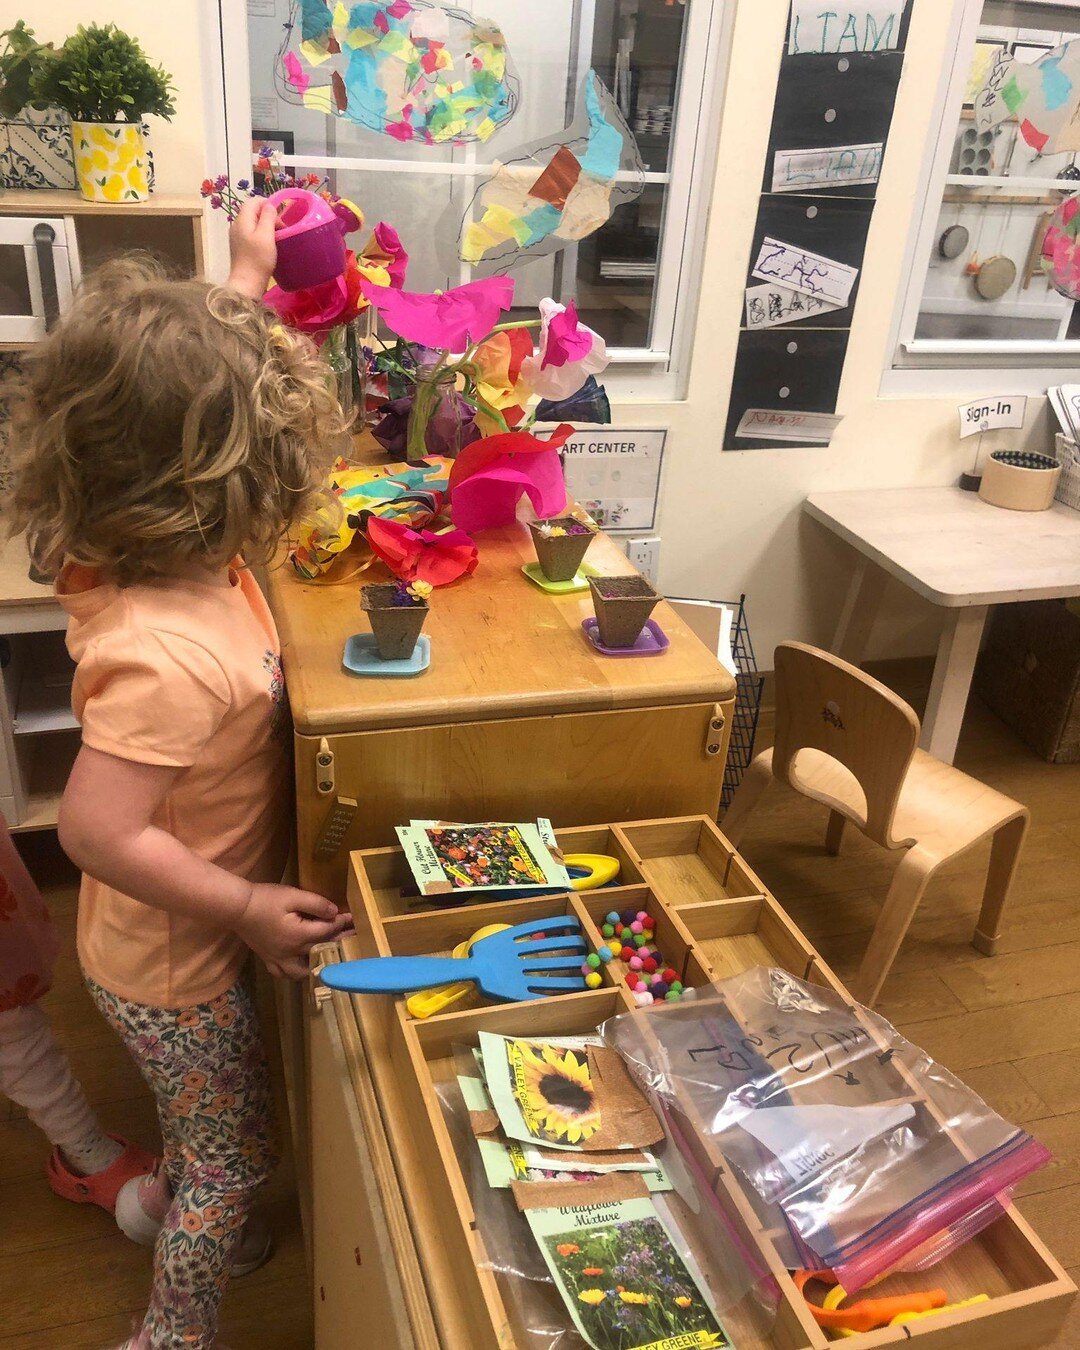 Nursery children created a flower shop in the dramatic play center, and spent time learning to arrange their bouquets!
#POTA #PreschooloftheArts #Reggio #ReggioInspired #Reggiopreschool #PreschoolInspiration #ChildCentered  #EarlyChildhoodEducation #